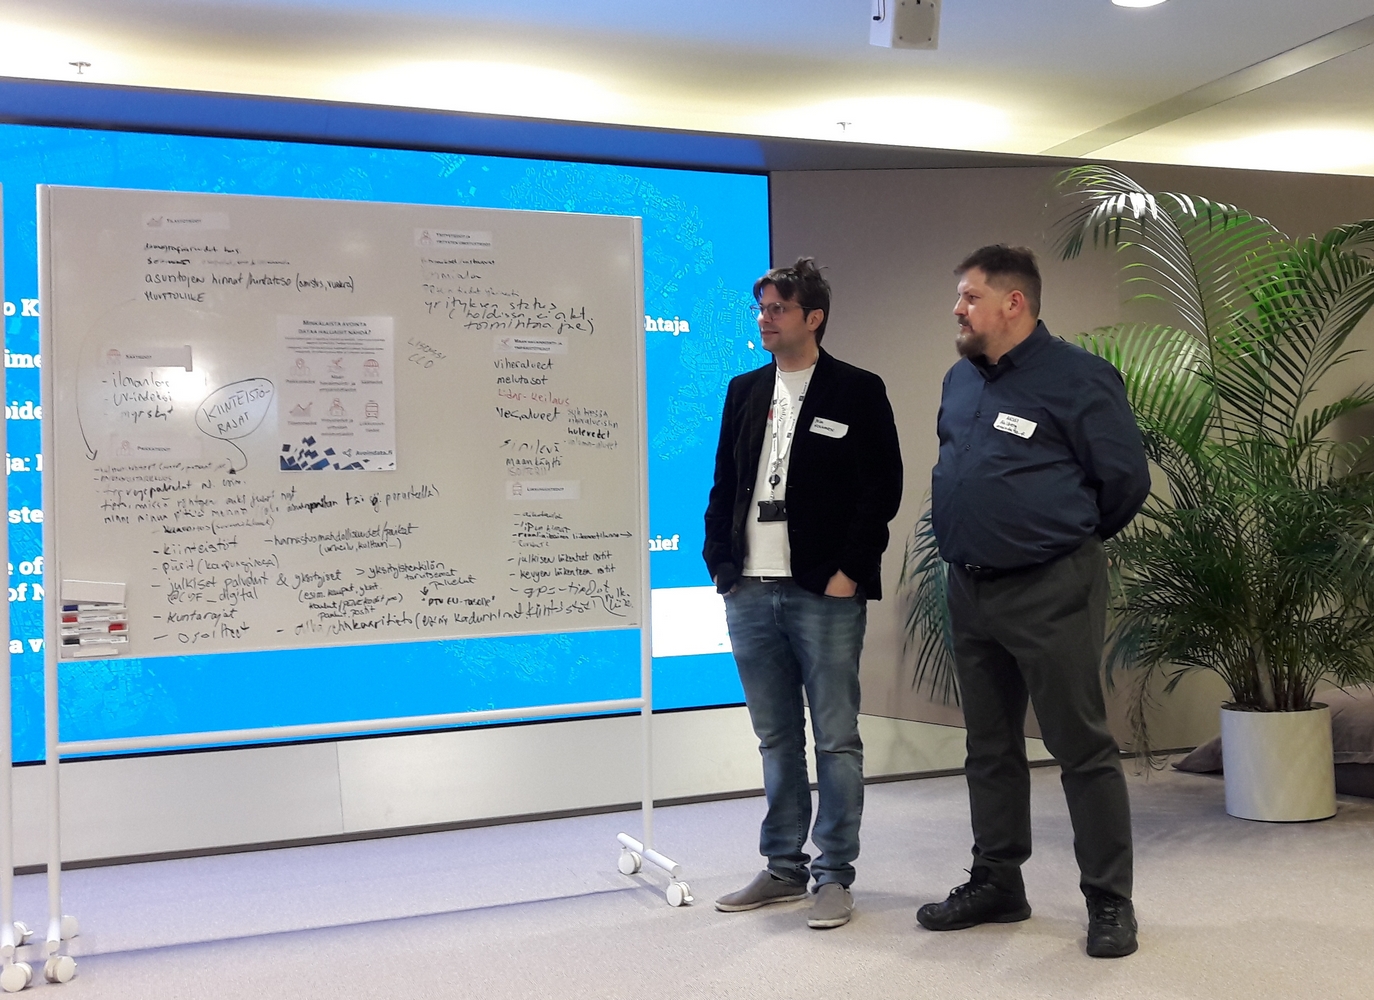 Avoindata.fi's service owner Mika Honkanen and product owner Anssi Ahlberg presented the dataset ideas to the crowd. 